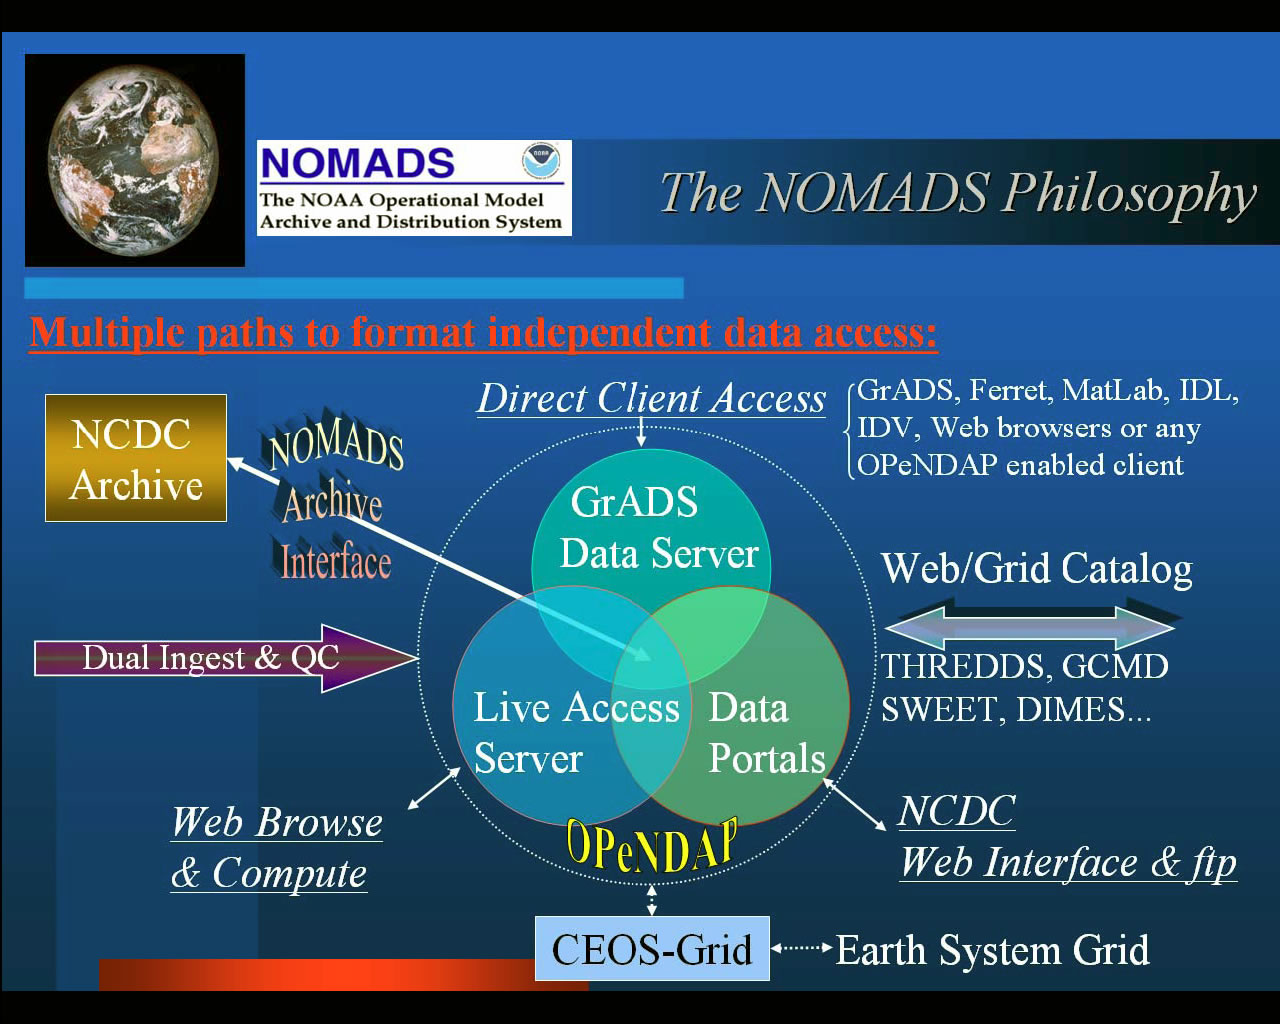 nomads-architecture with GrADS data server, data portals, Live Access Server and data flow included.